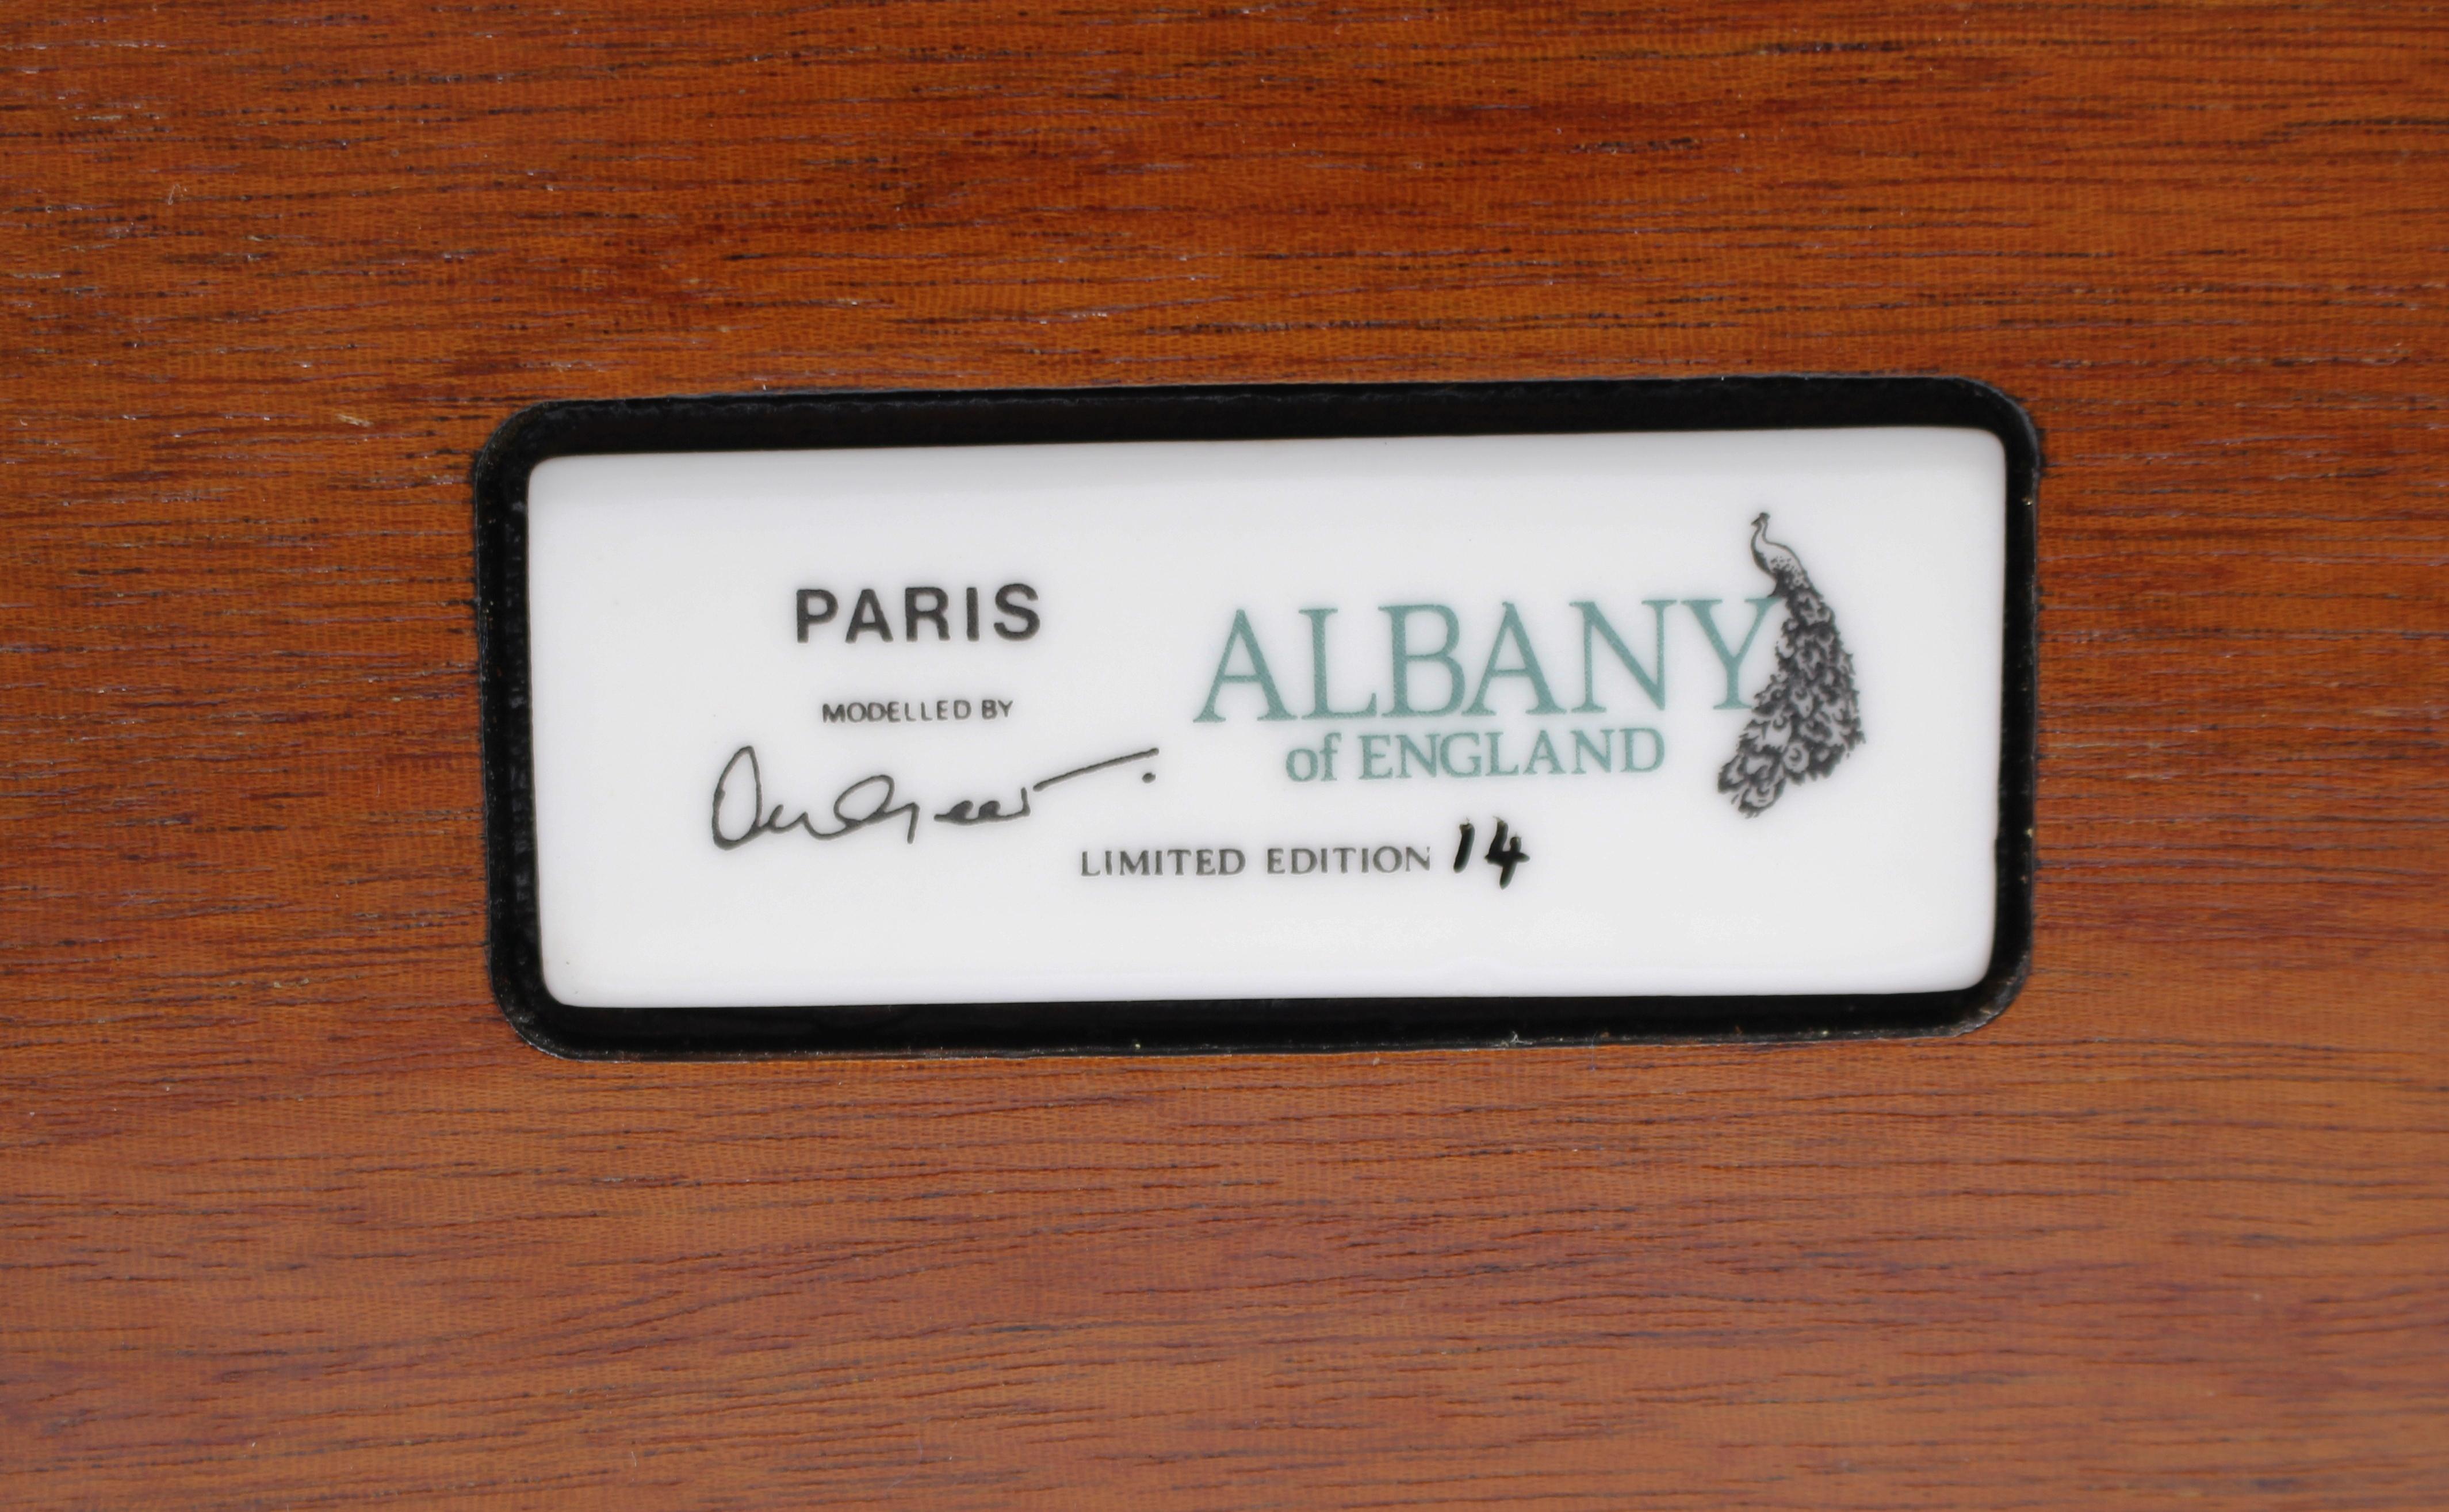 Albany Limited Edition Porcelain and Bronze Figurine Paris 5